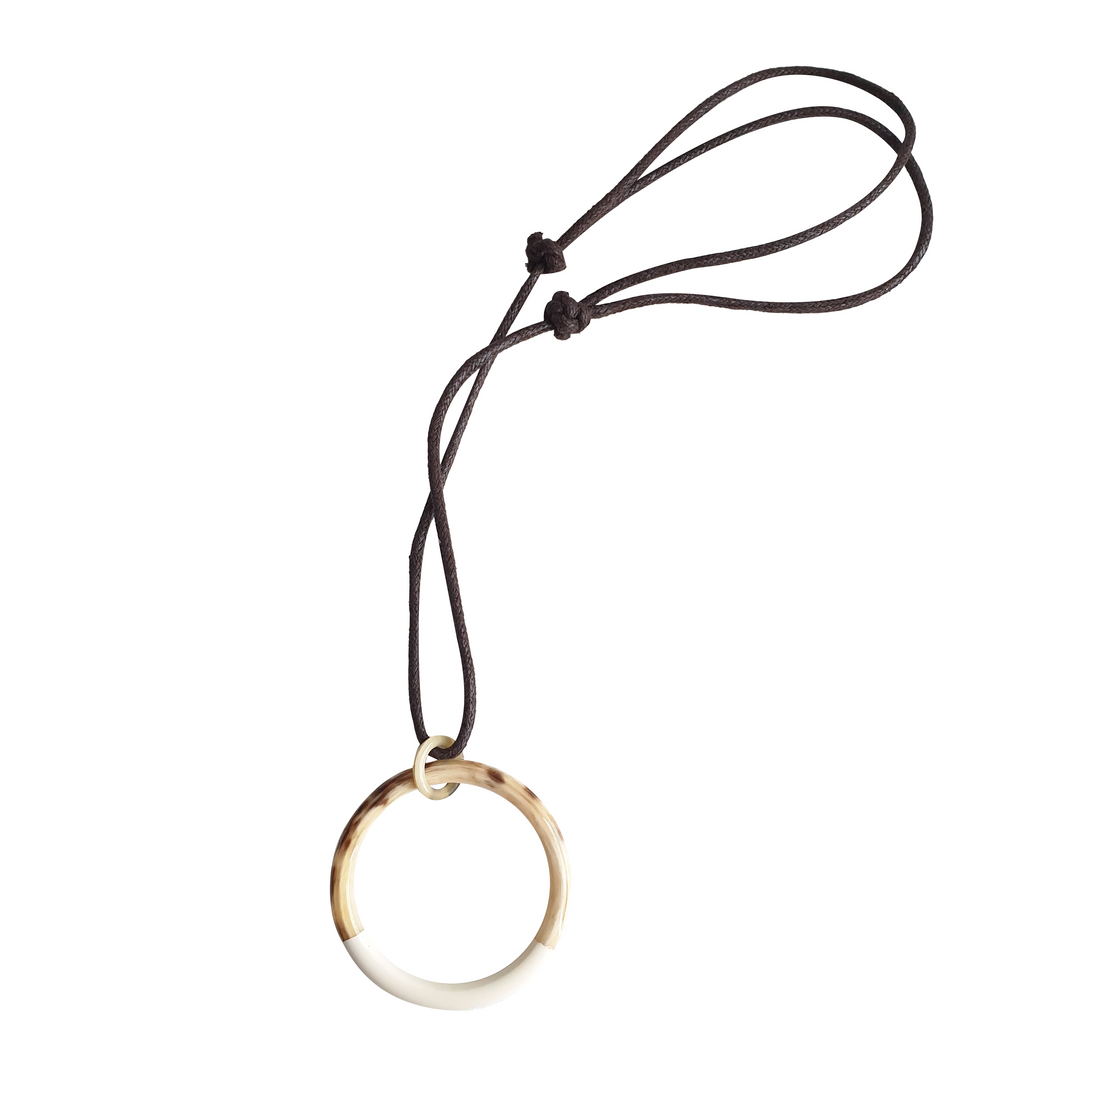 Minimalist thin ring pendant features bright colour in natural buffalo horn for women's gifts